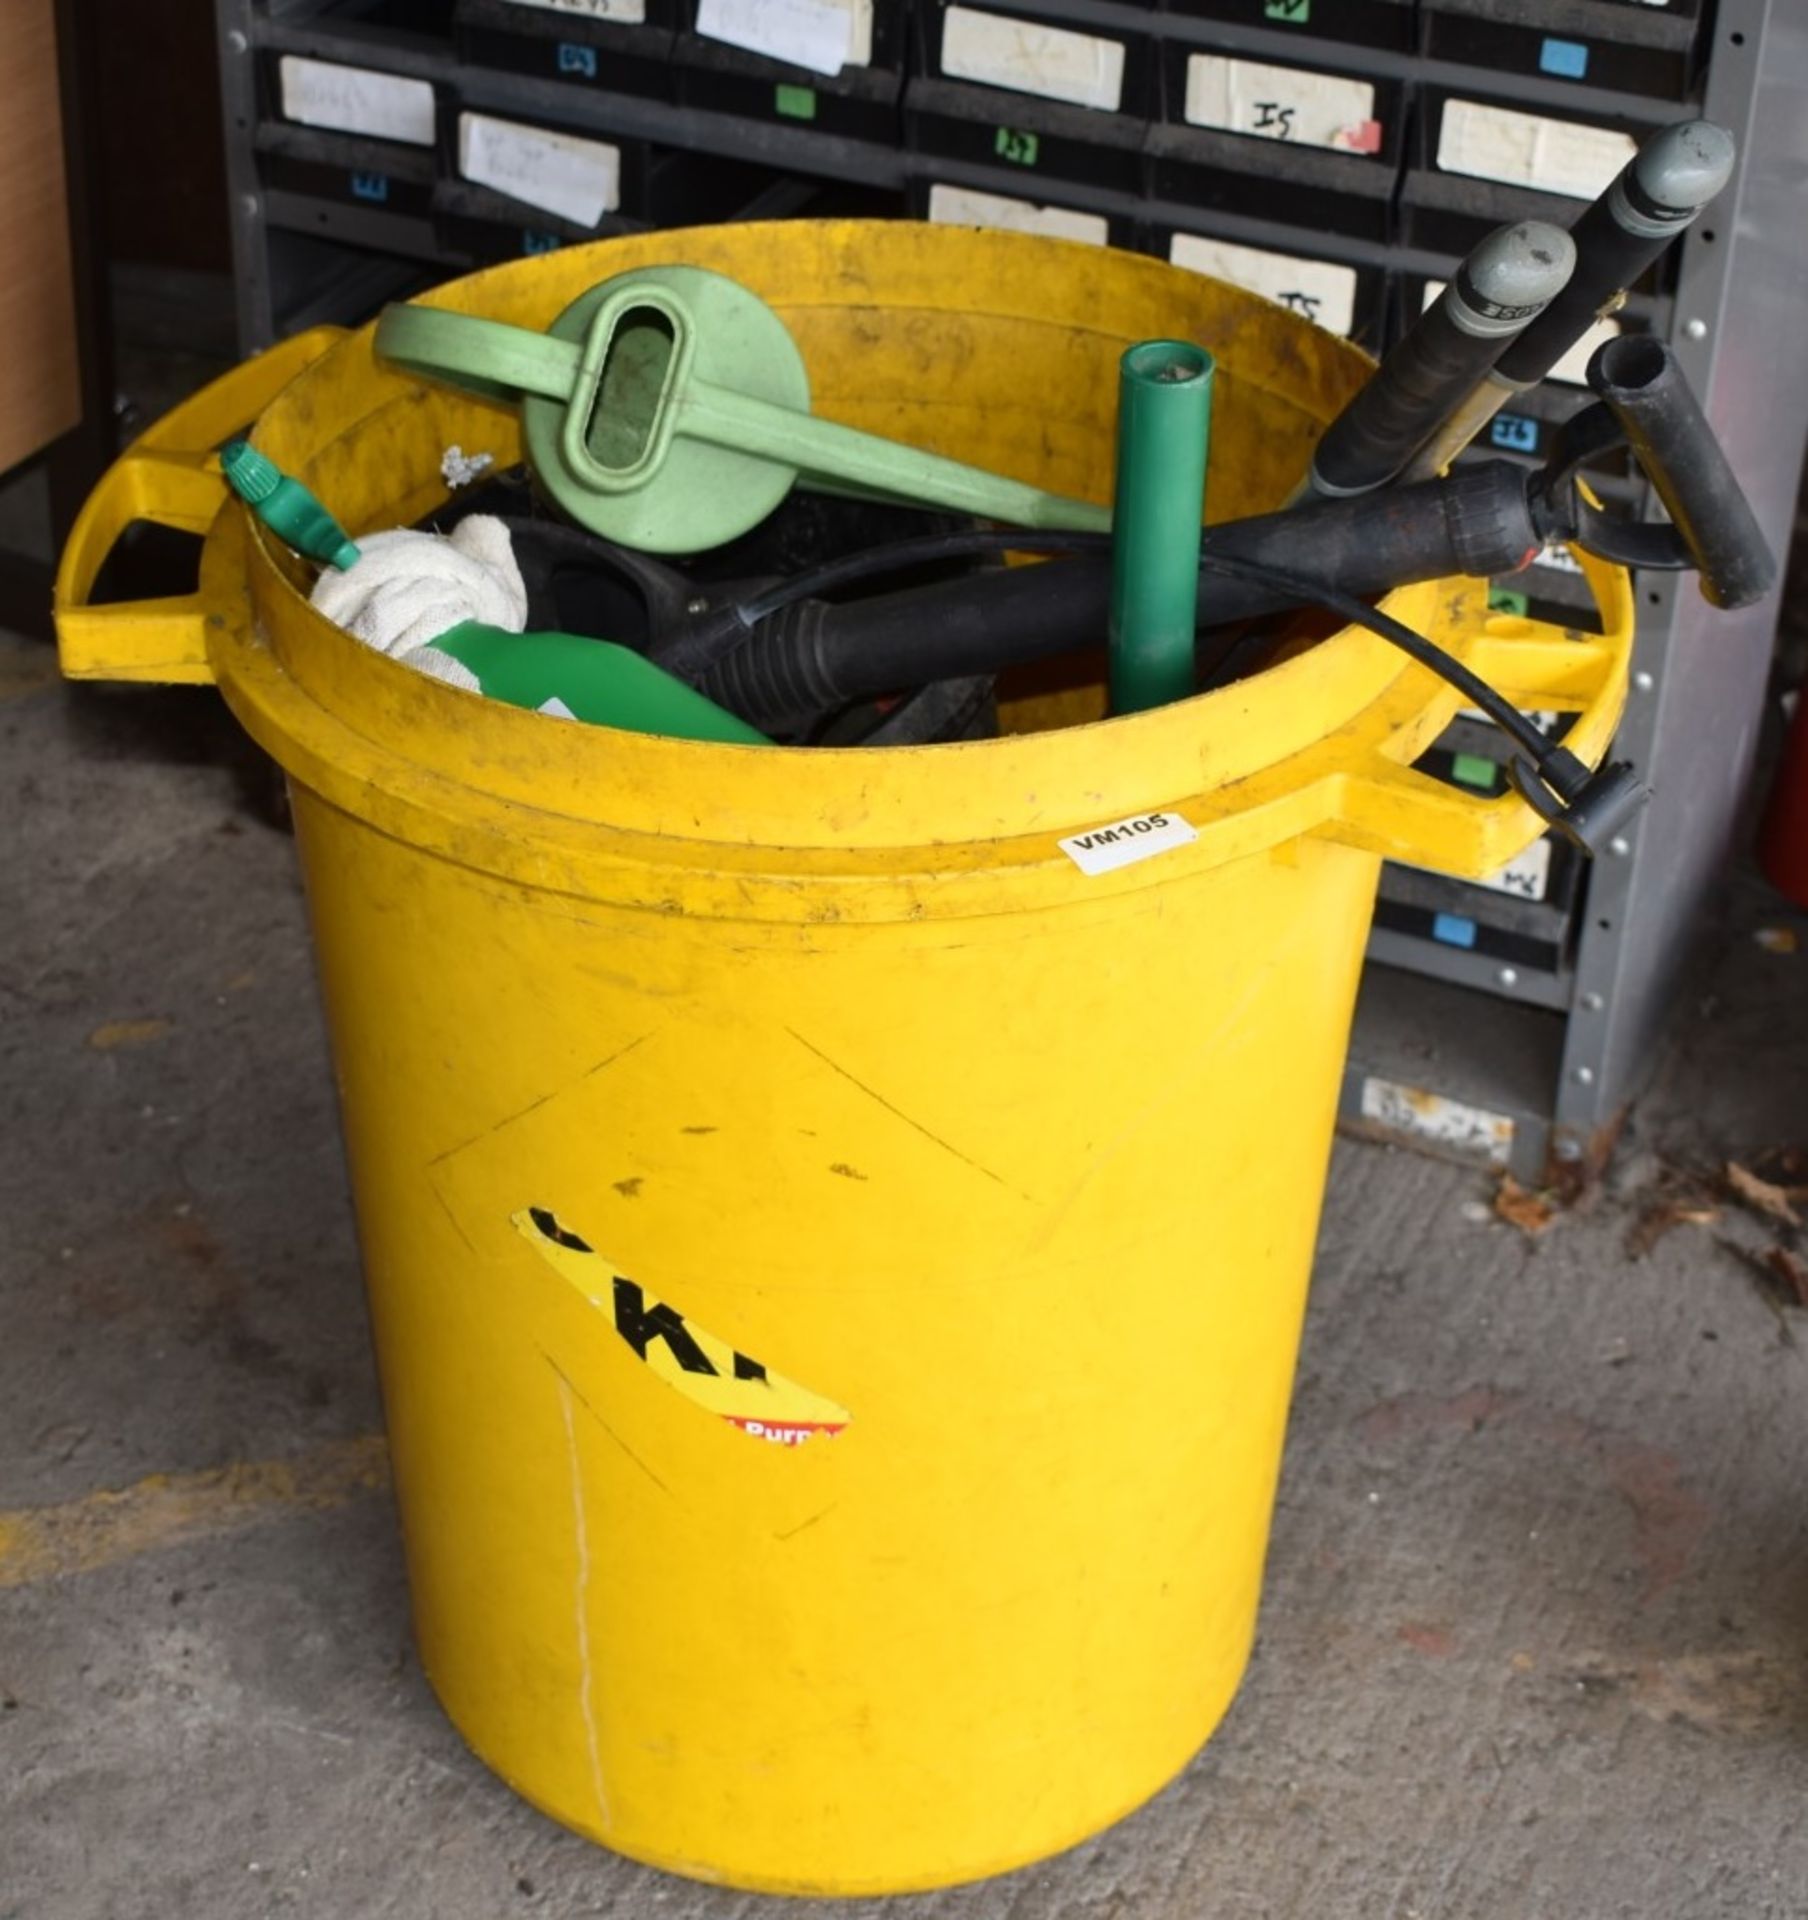 1 x Yellow Waste Bin With Selection of Gardening Tools and Air Pump - Ref VM105 B2 - CL409 -